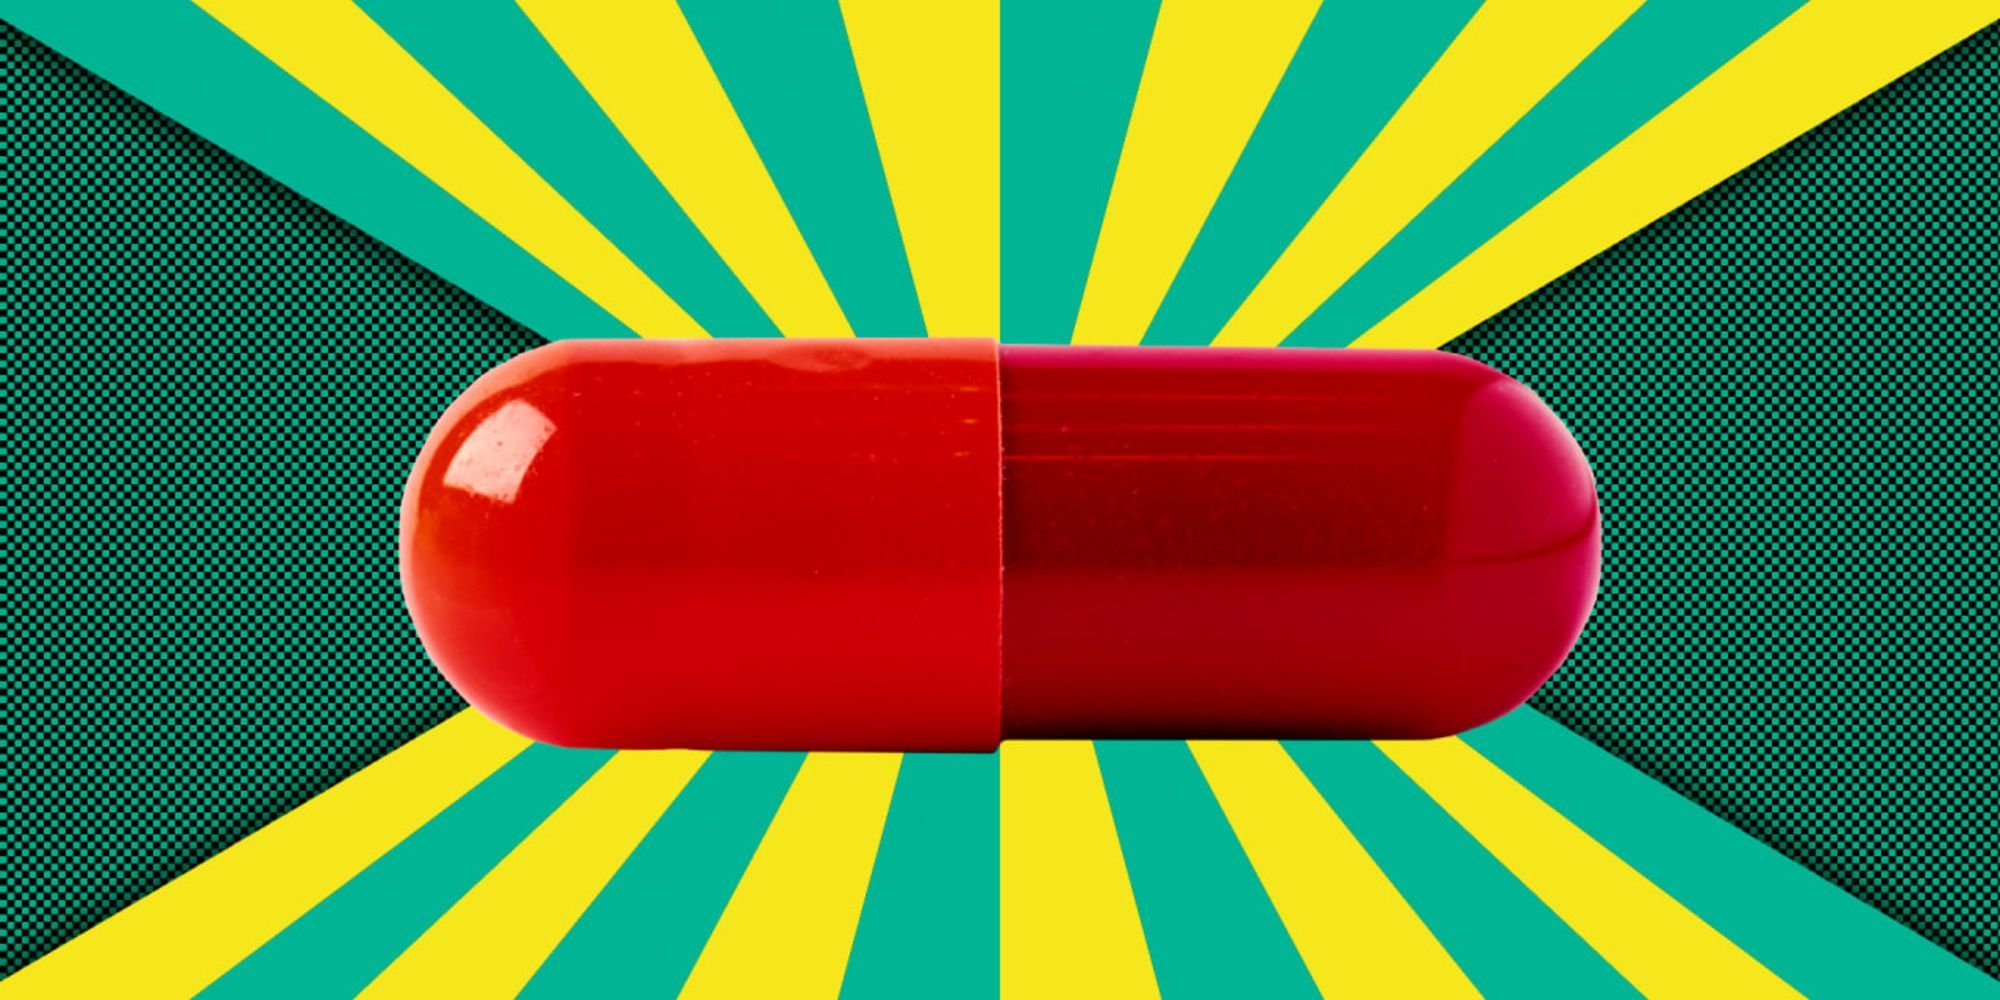 A red pill on a green and yellow background. 